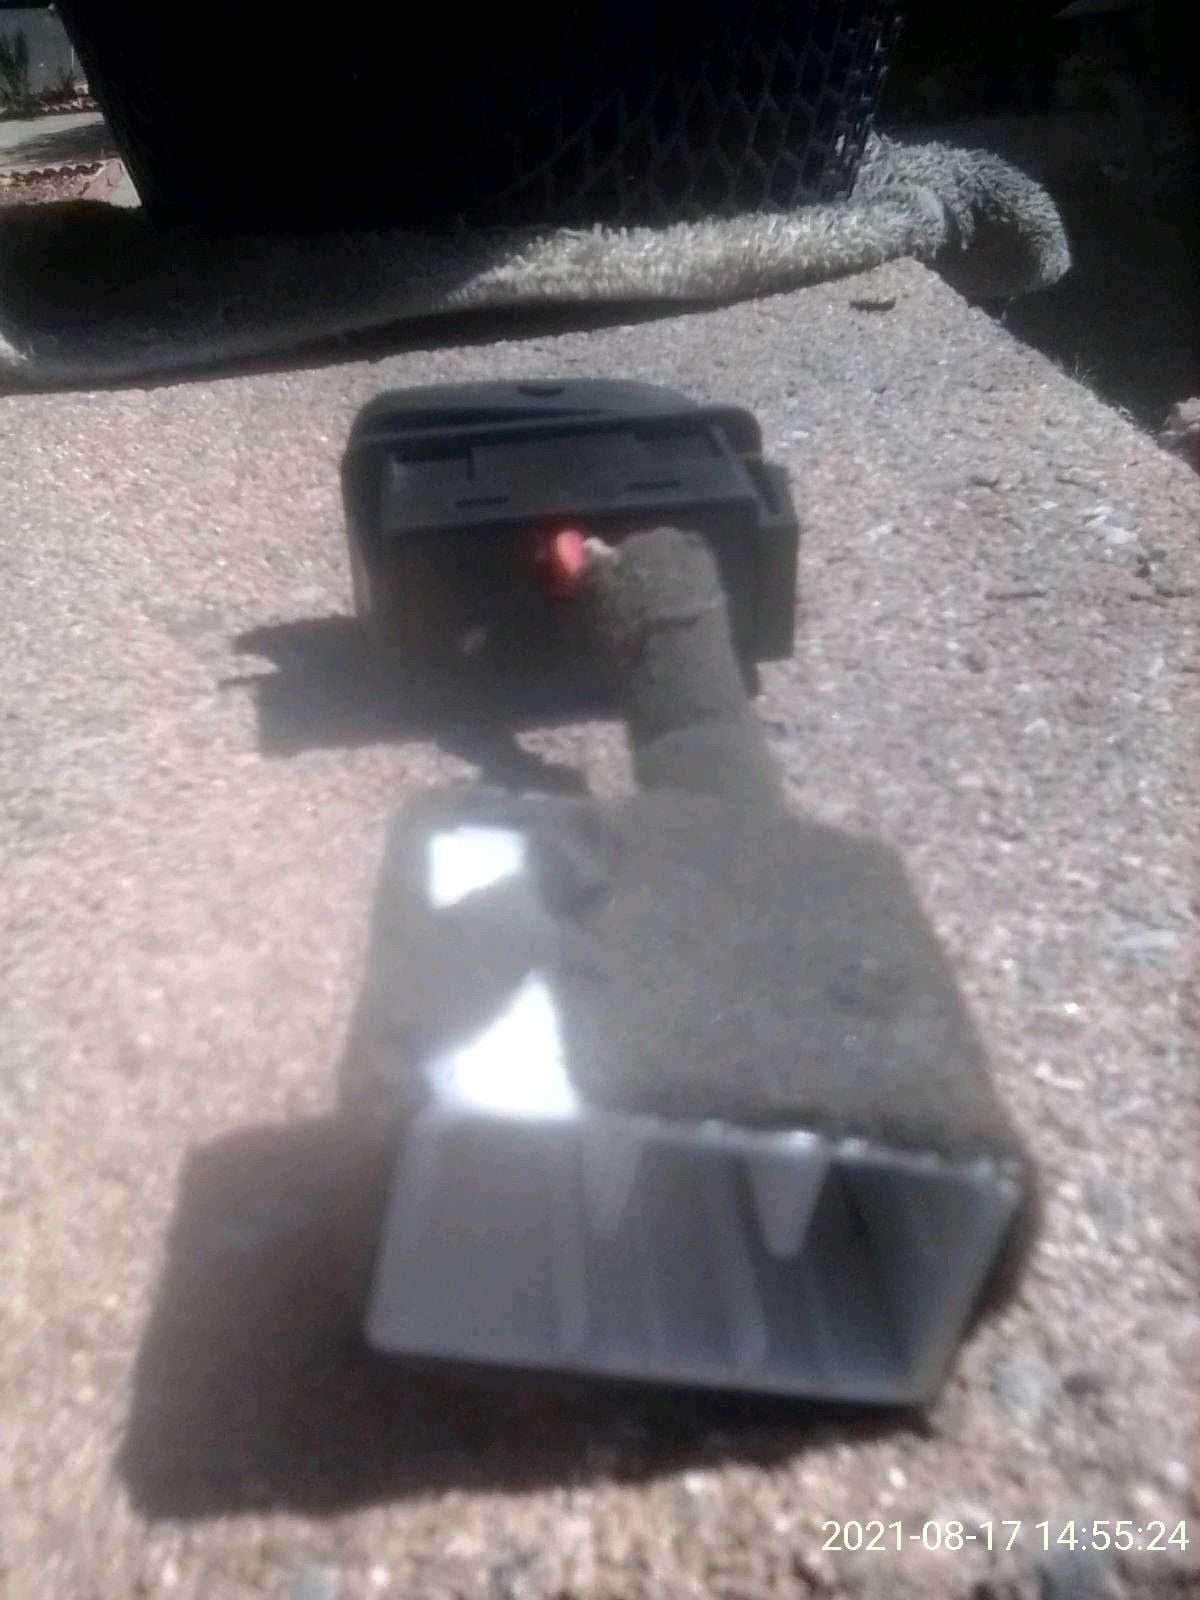 Miscellaneous - FD - OEM Fog Light Switch - Used - 1993 to 2002 Mazda RX-7 - San Jose, CA 95121, United States